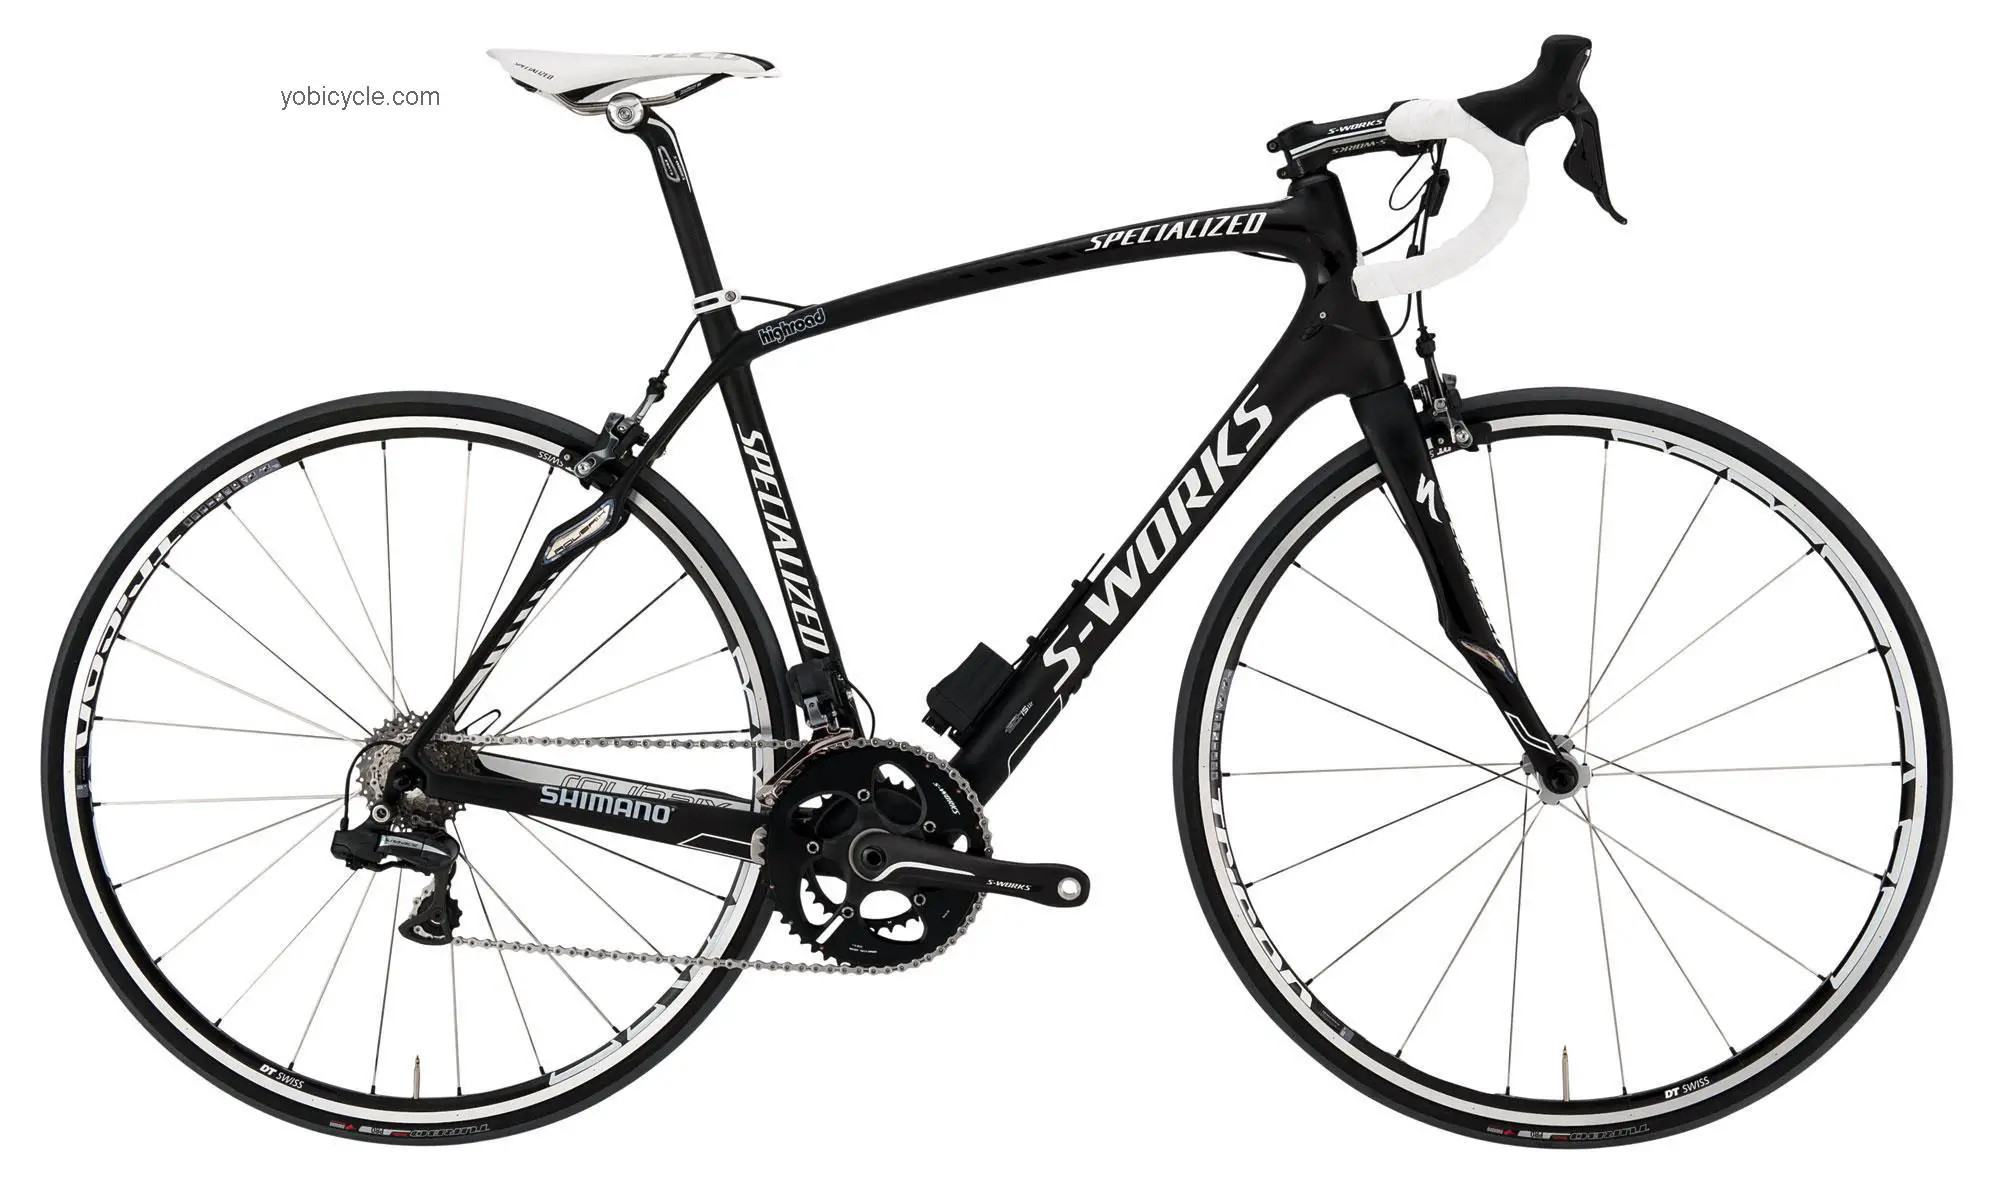 Specialized S-Works Roubaix SL3 Compact Di2 2012 comparison online with competitors